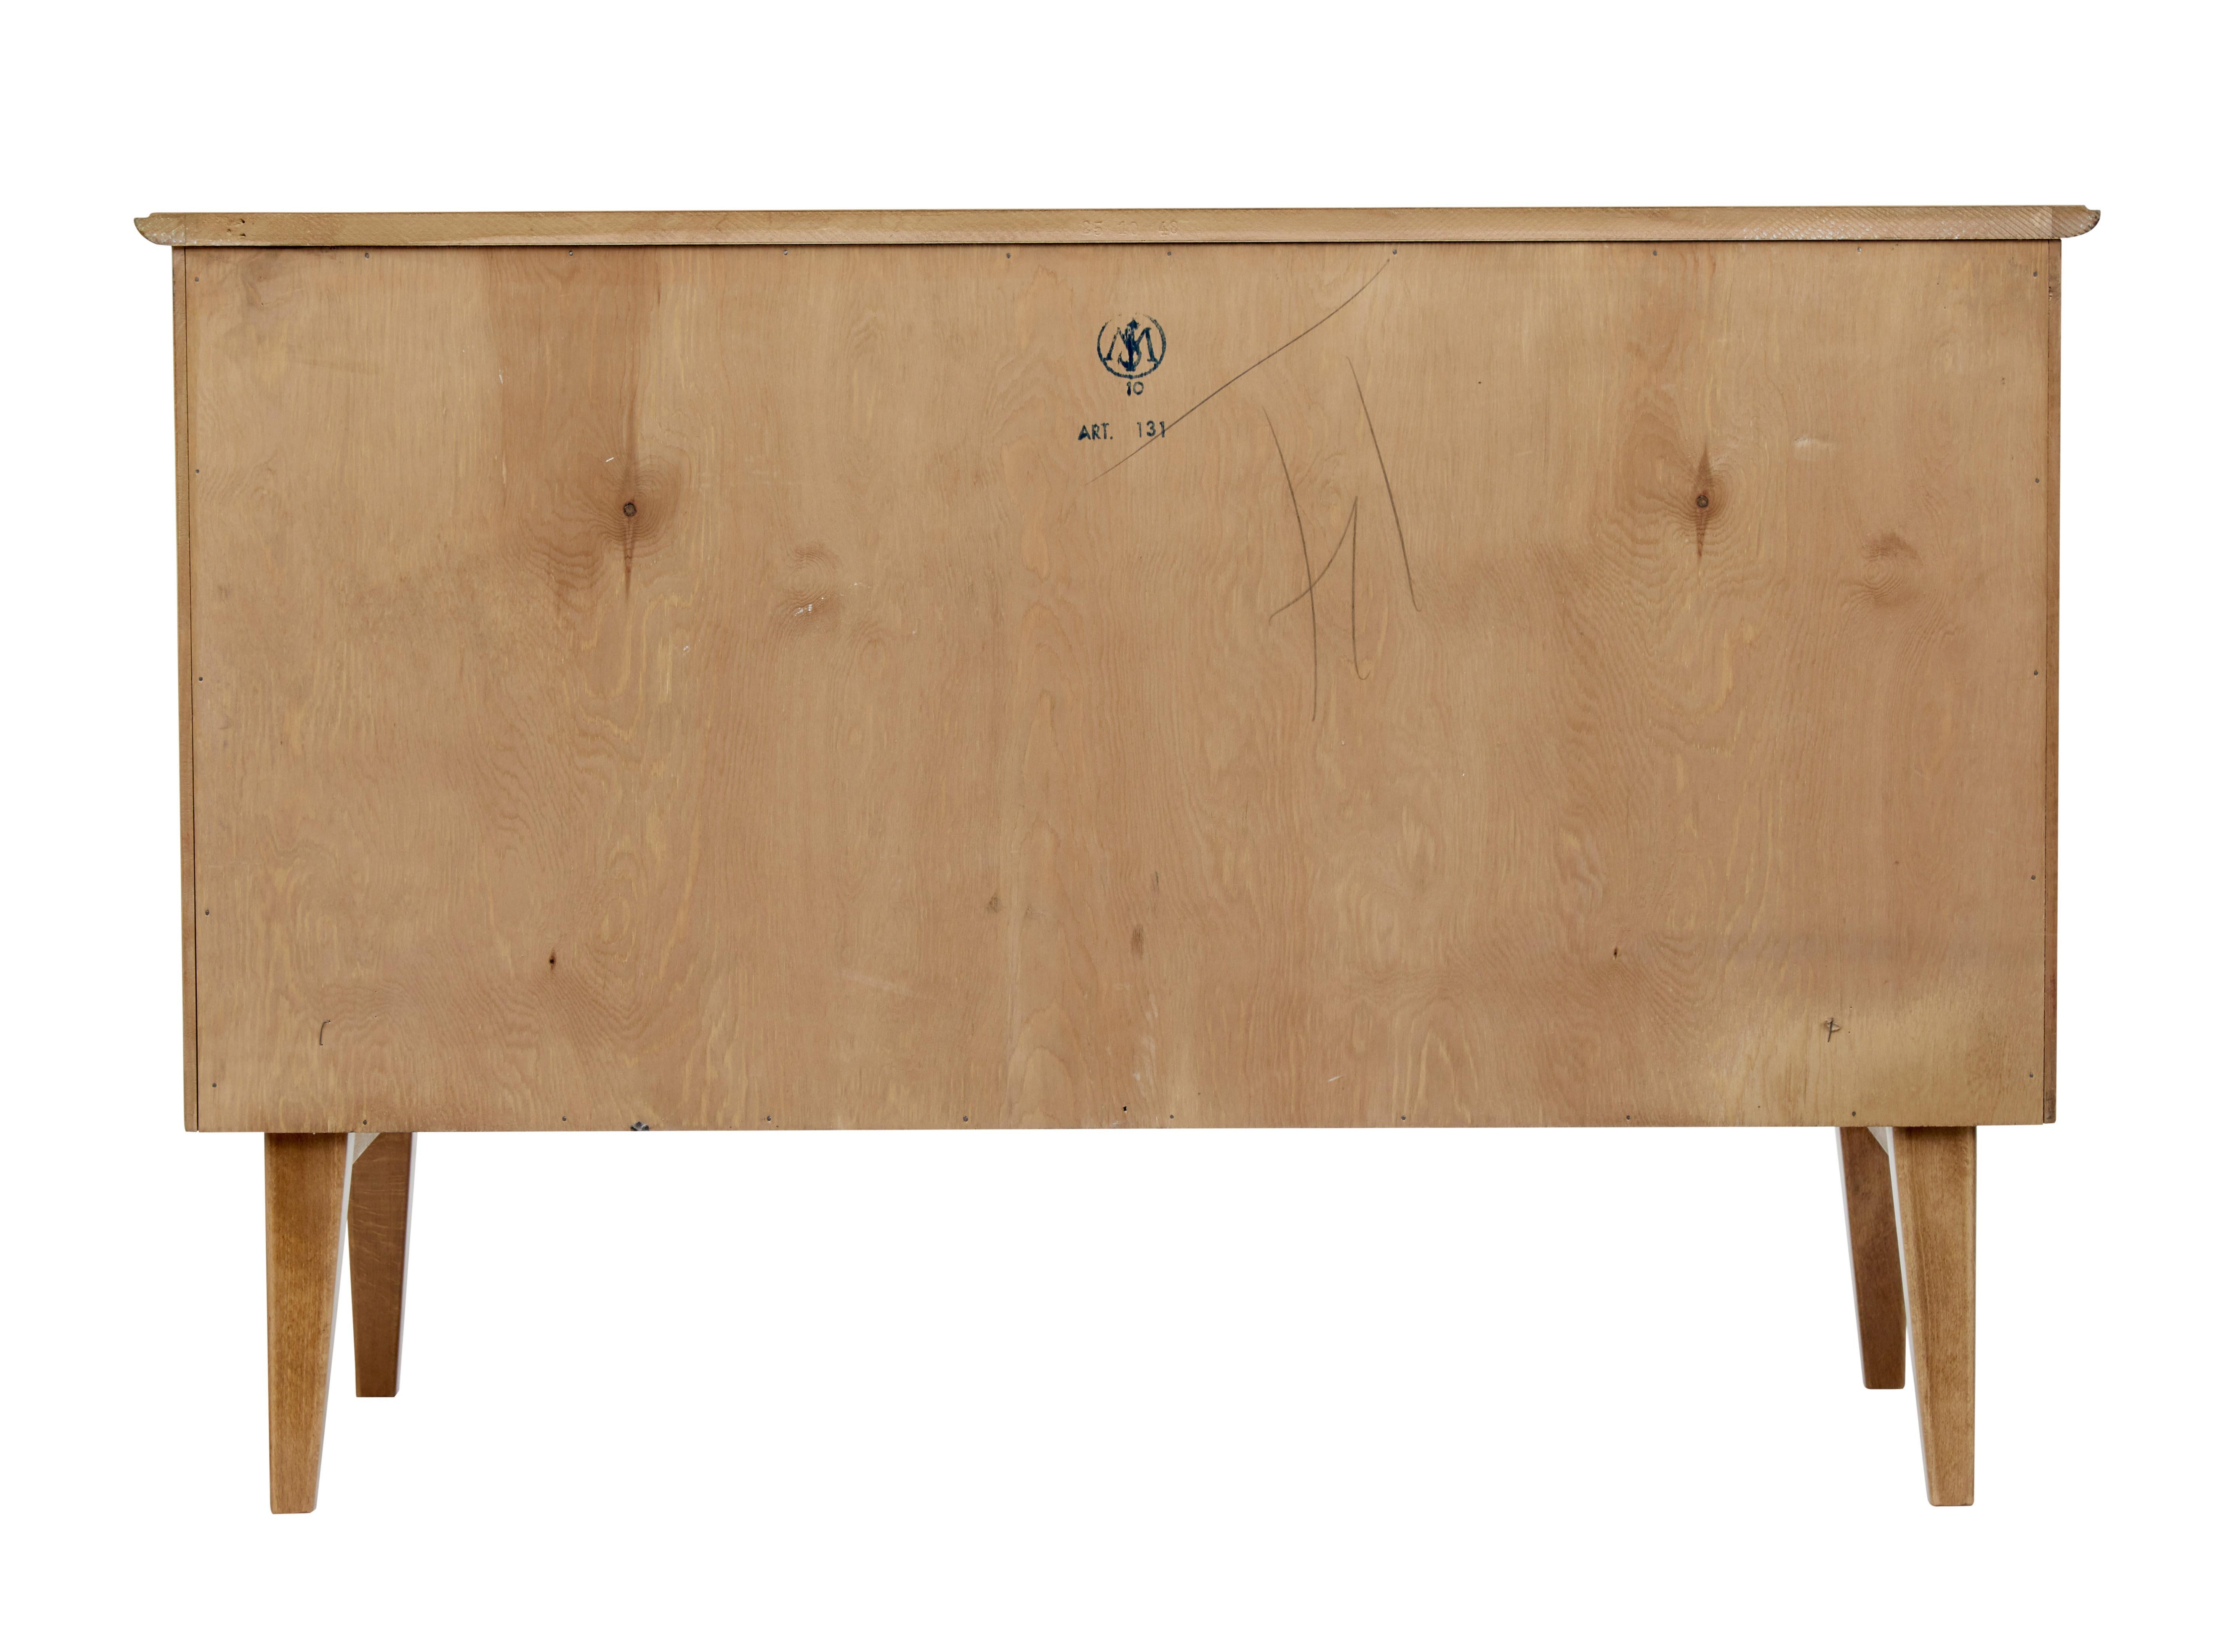 Hand-Crafted Mid-20th Century Swedish Walnut Chest of Drawers by Bodafors